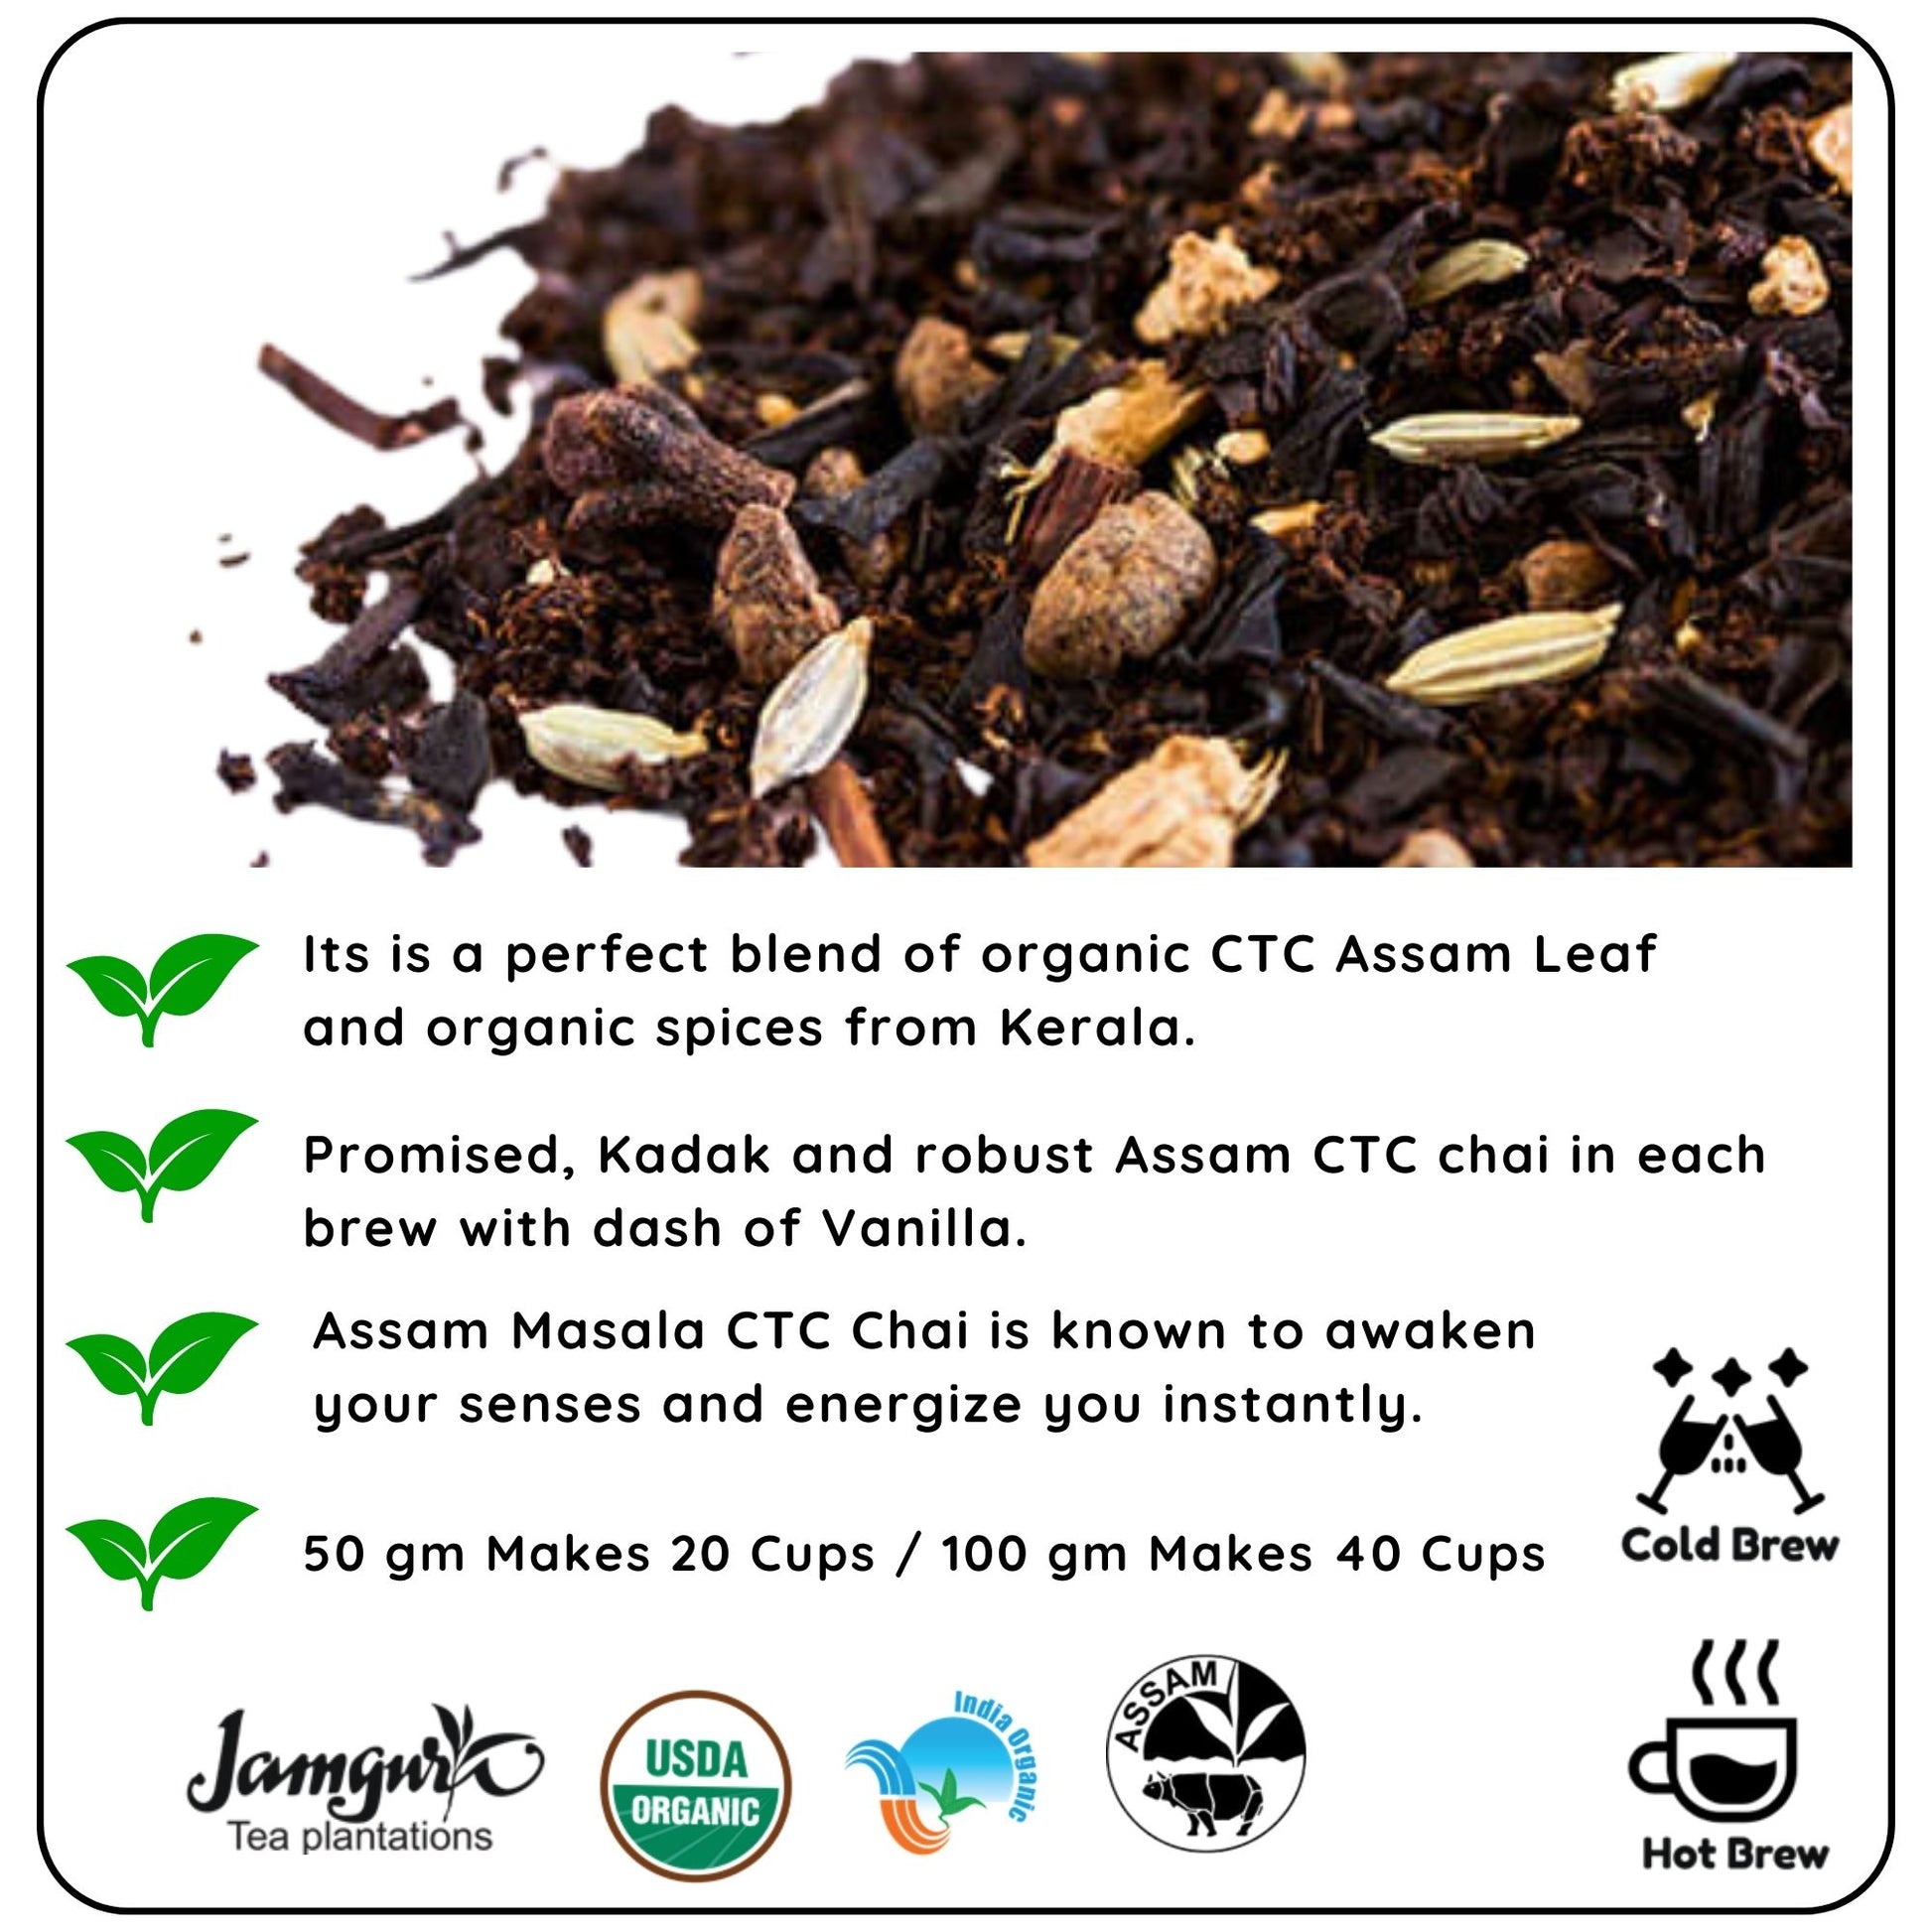 Organic Possibilitea - How Organic Possibilitea Can Stimulate Your Senses and Balance Your Sugar Levels - Radhikas Fine Teas and Whatnots